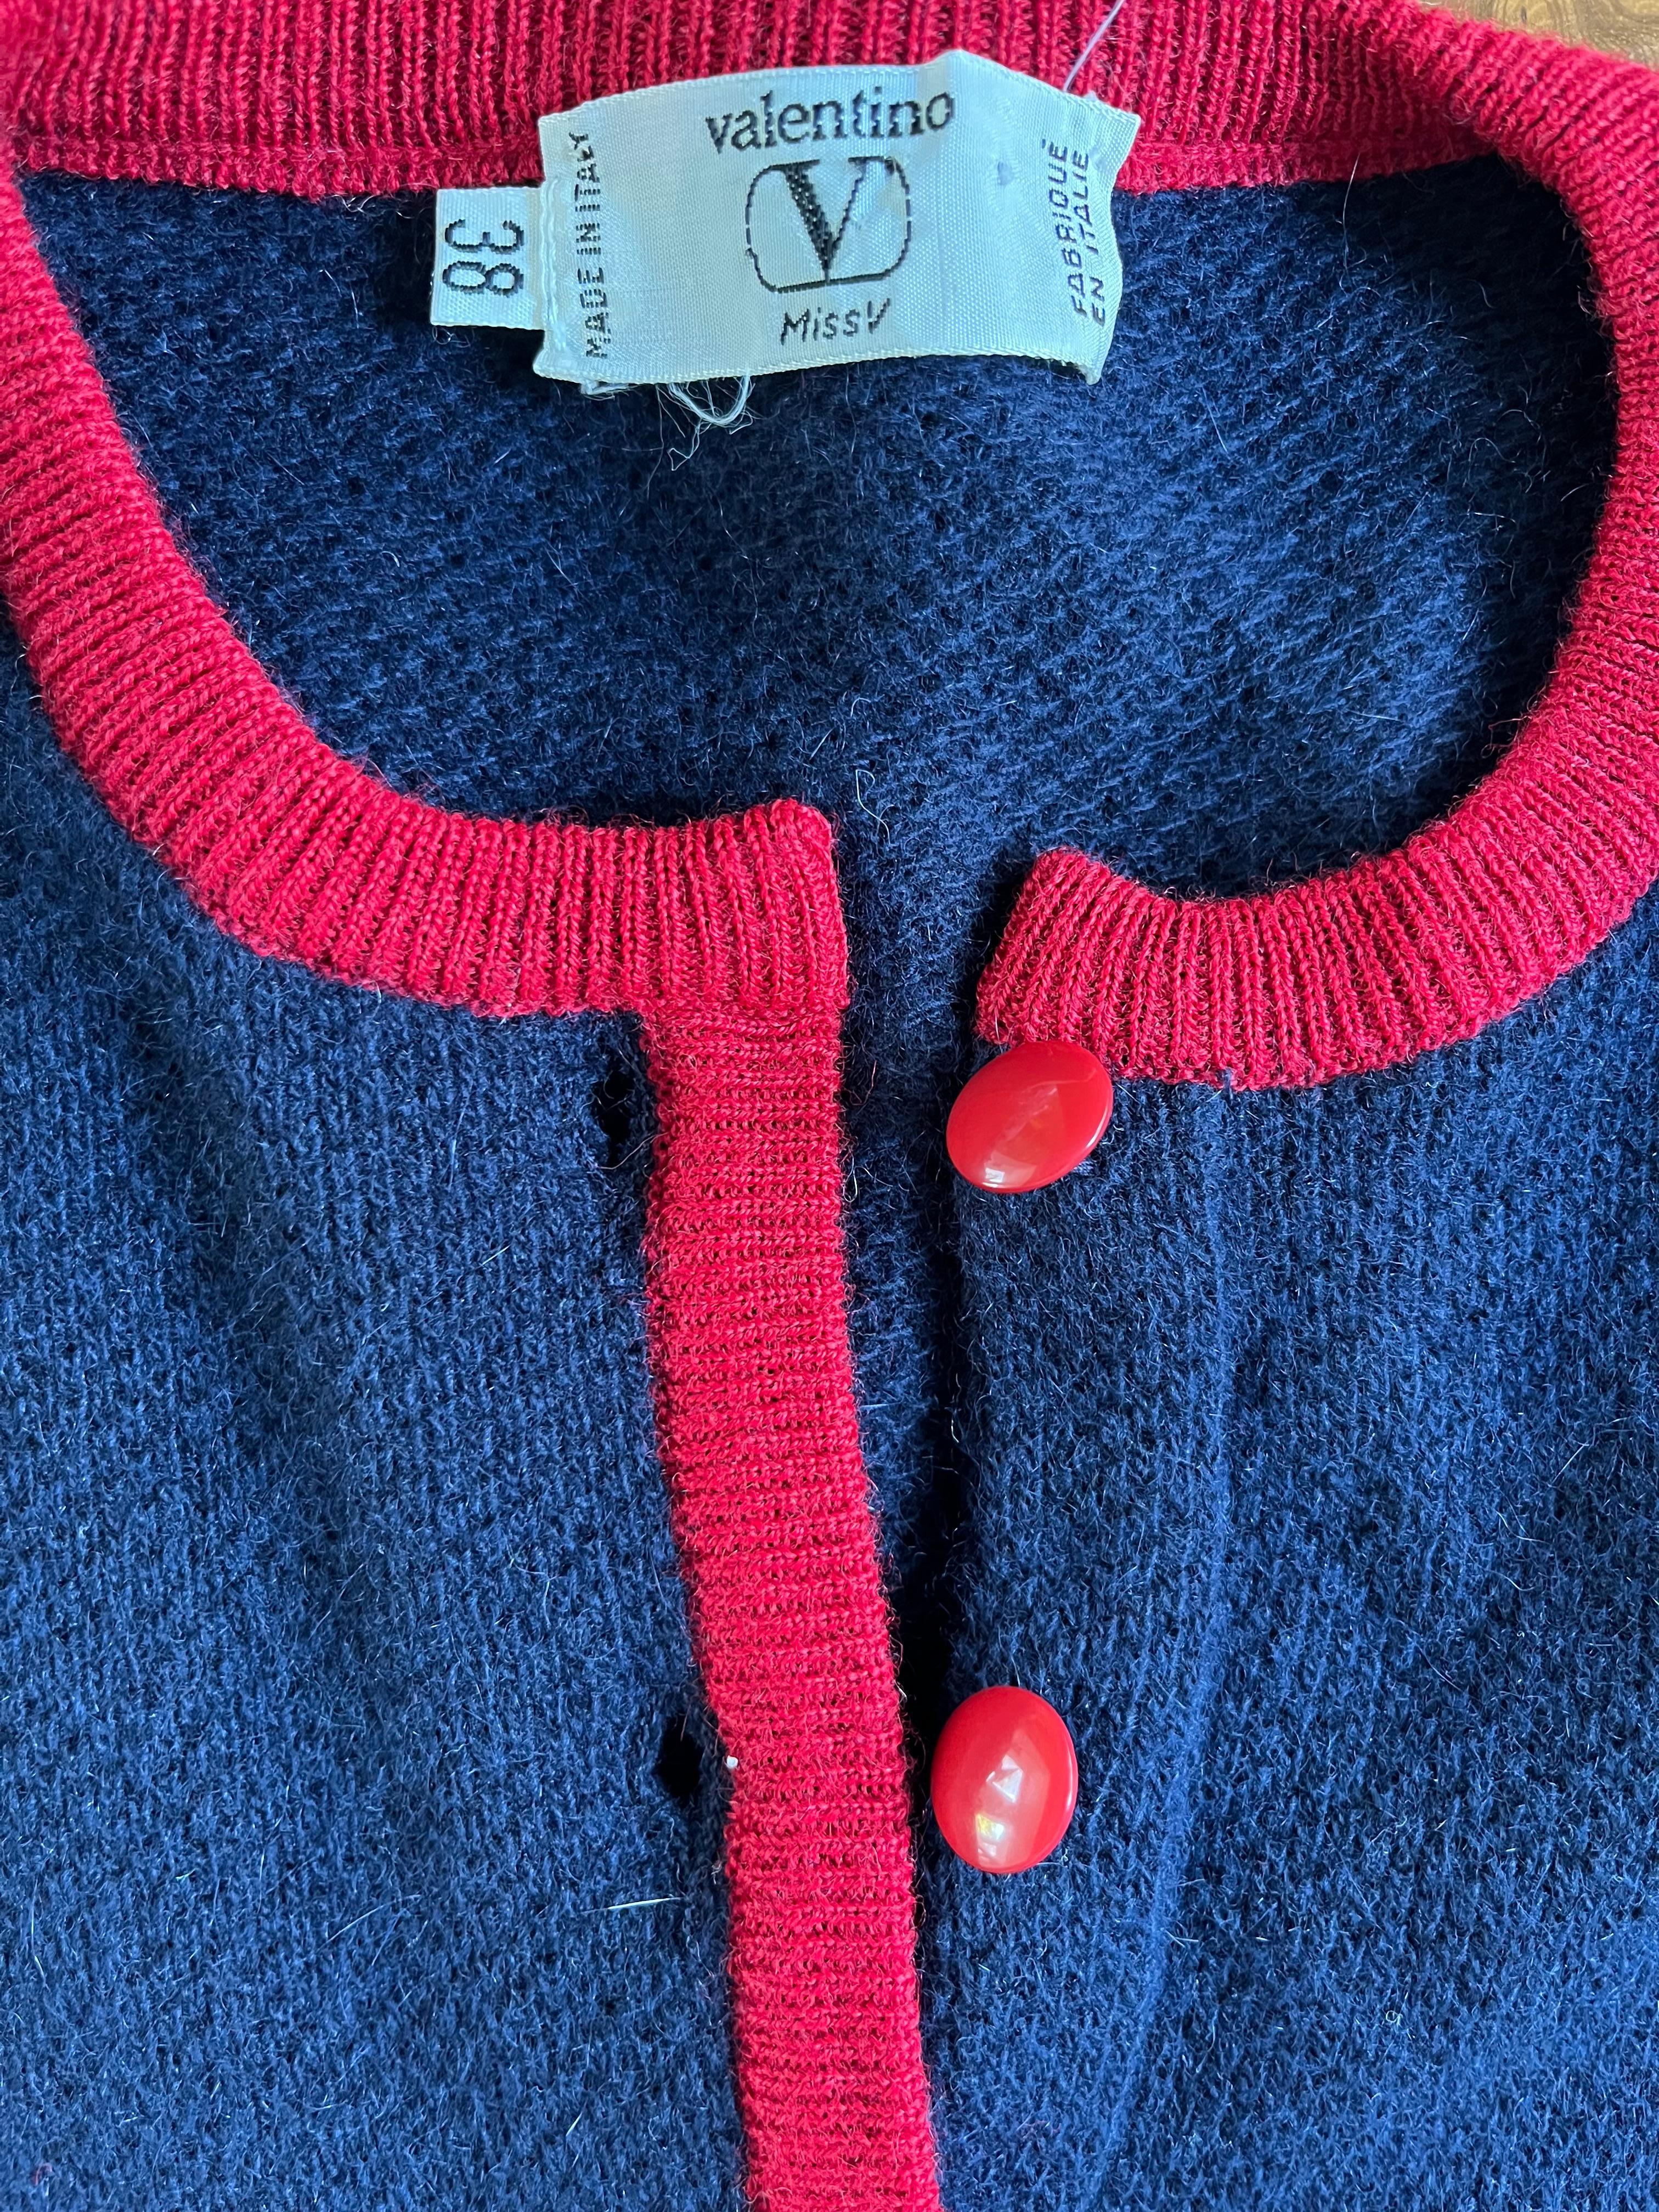 1990's Valentino Miss V navy lambswool and angora wool sweater.  A doubly ply knit with red detailing around the collar with 3 red acrylic buttons and red detailing on the inside layer of the waist area.  Looks to have been lightly or never worn. 